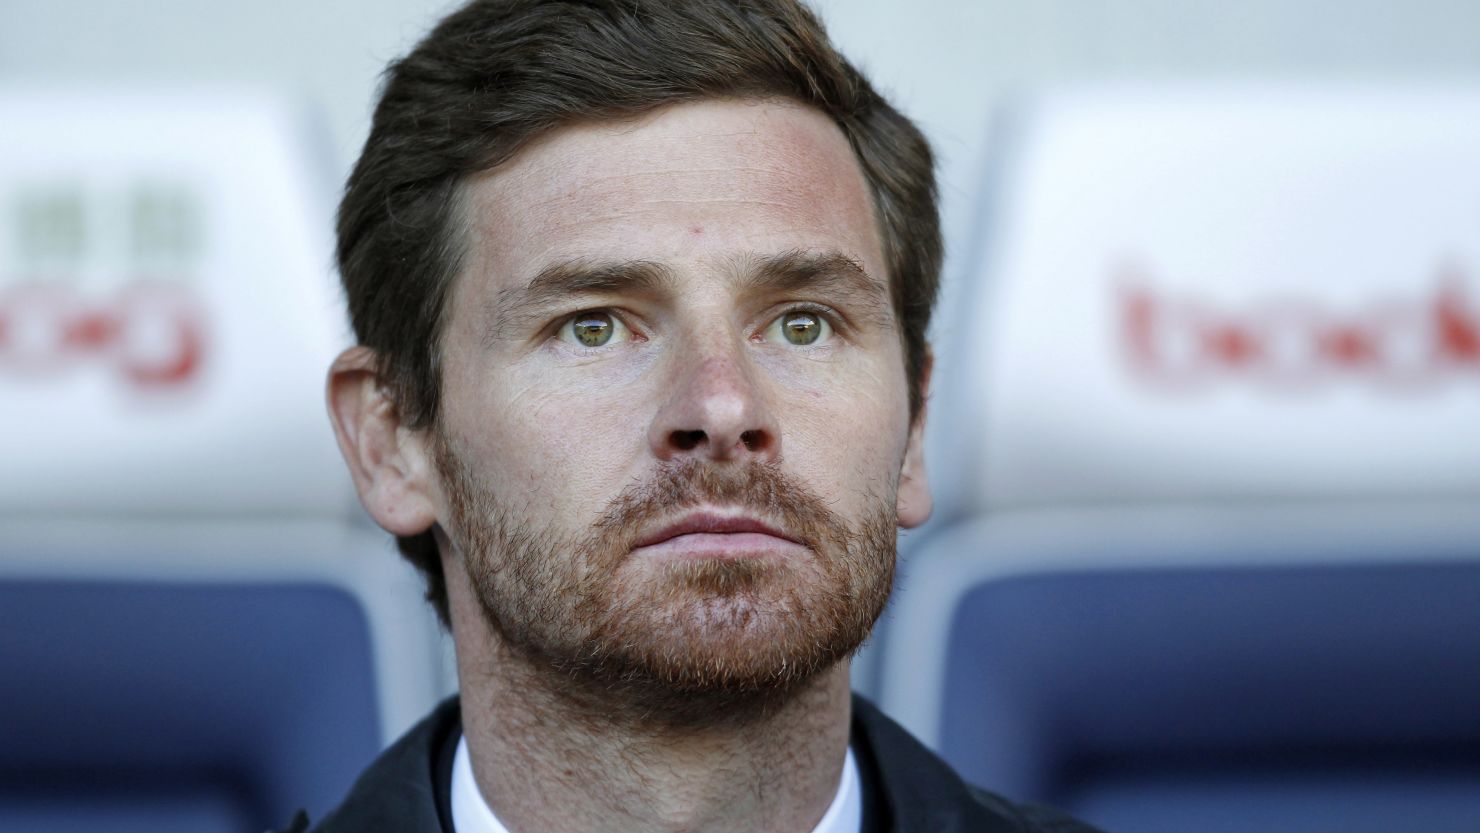 Andre Villas-Boas is under renewed pressure as Chelsea boss after his side lost 1-0 to West Brom in the English Premier League